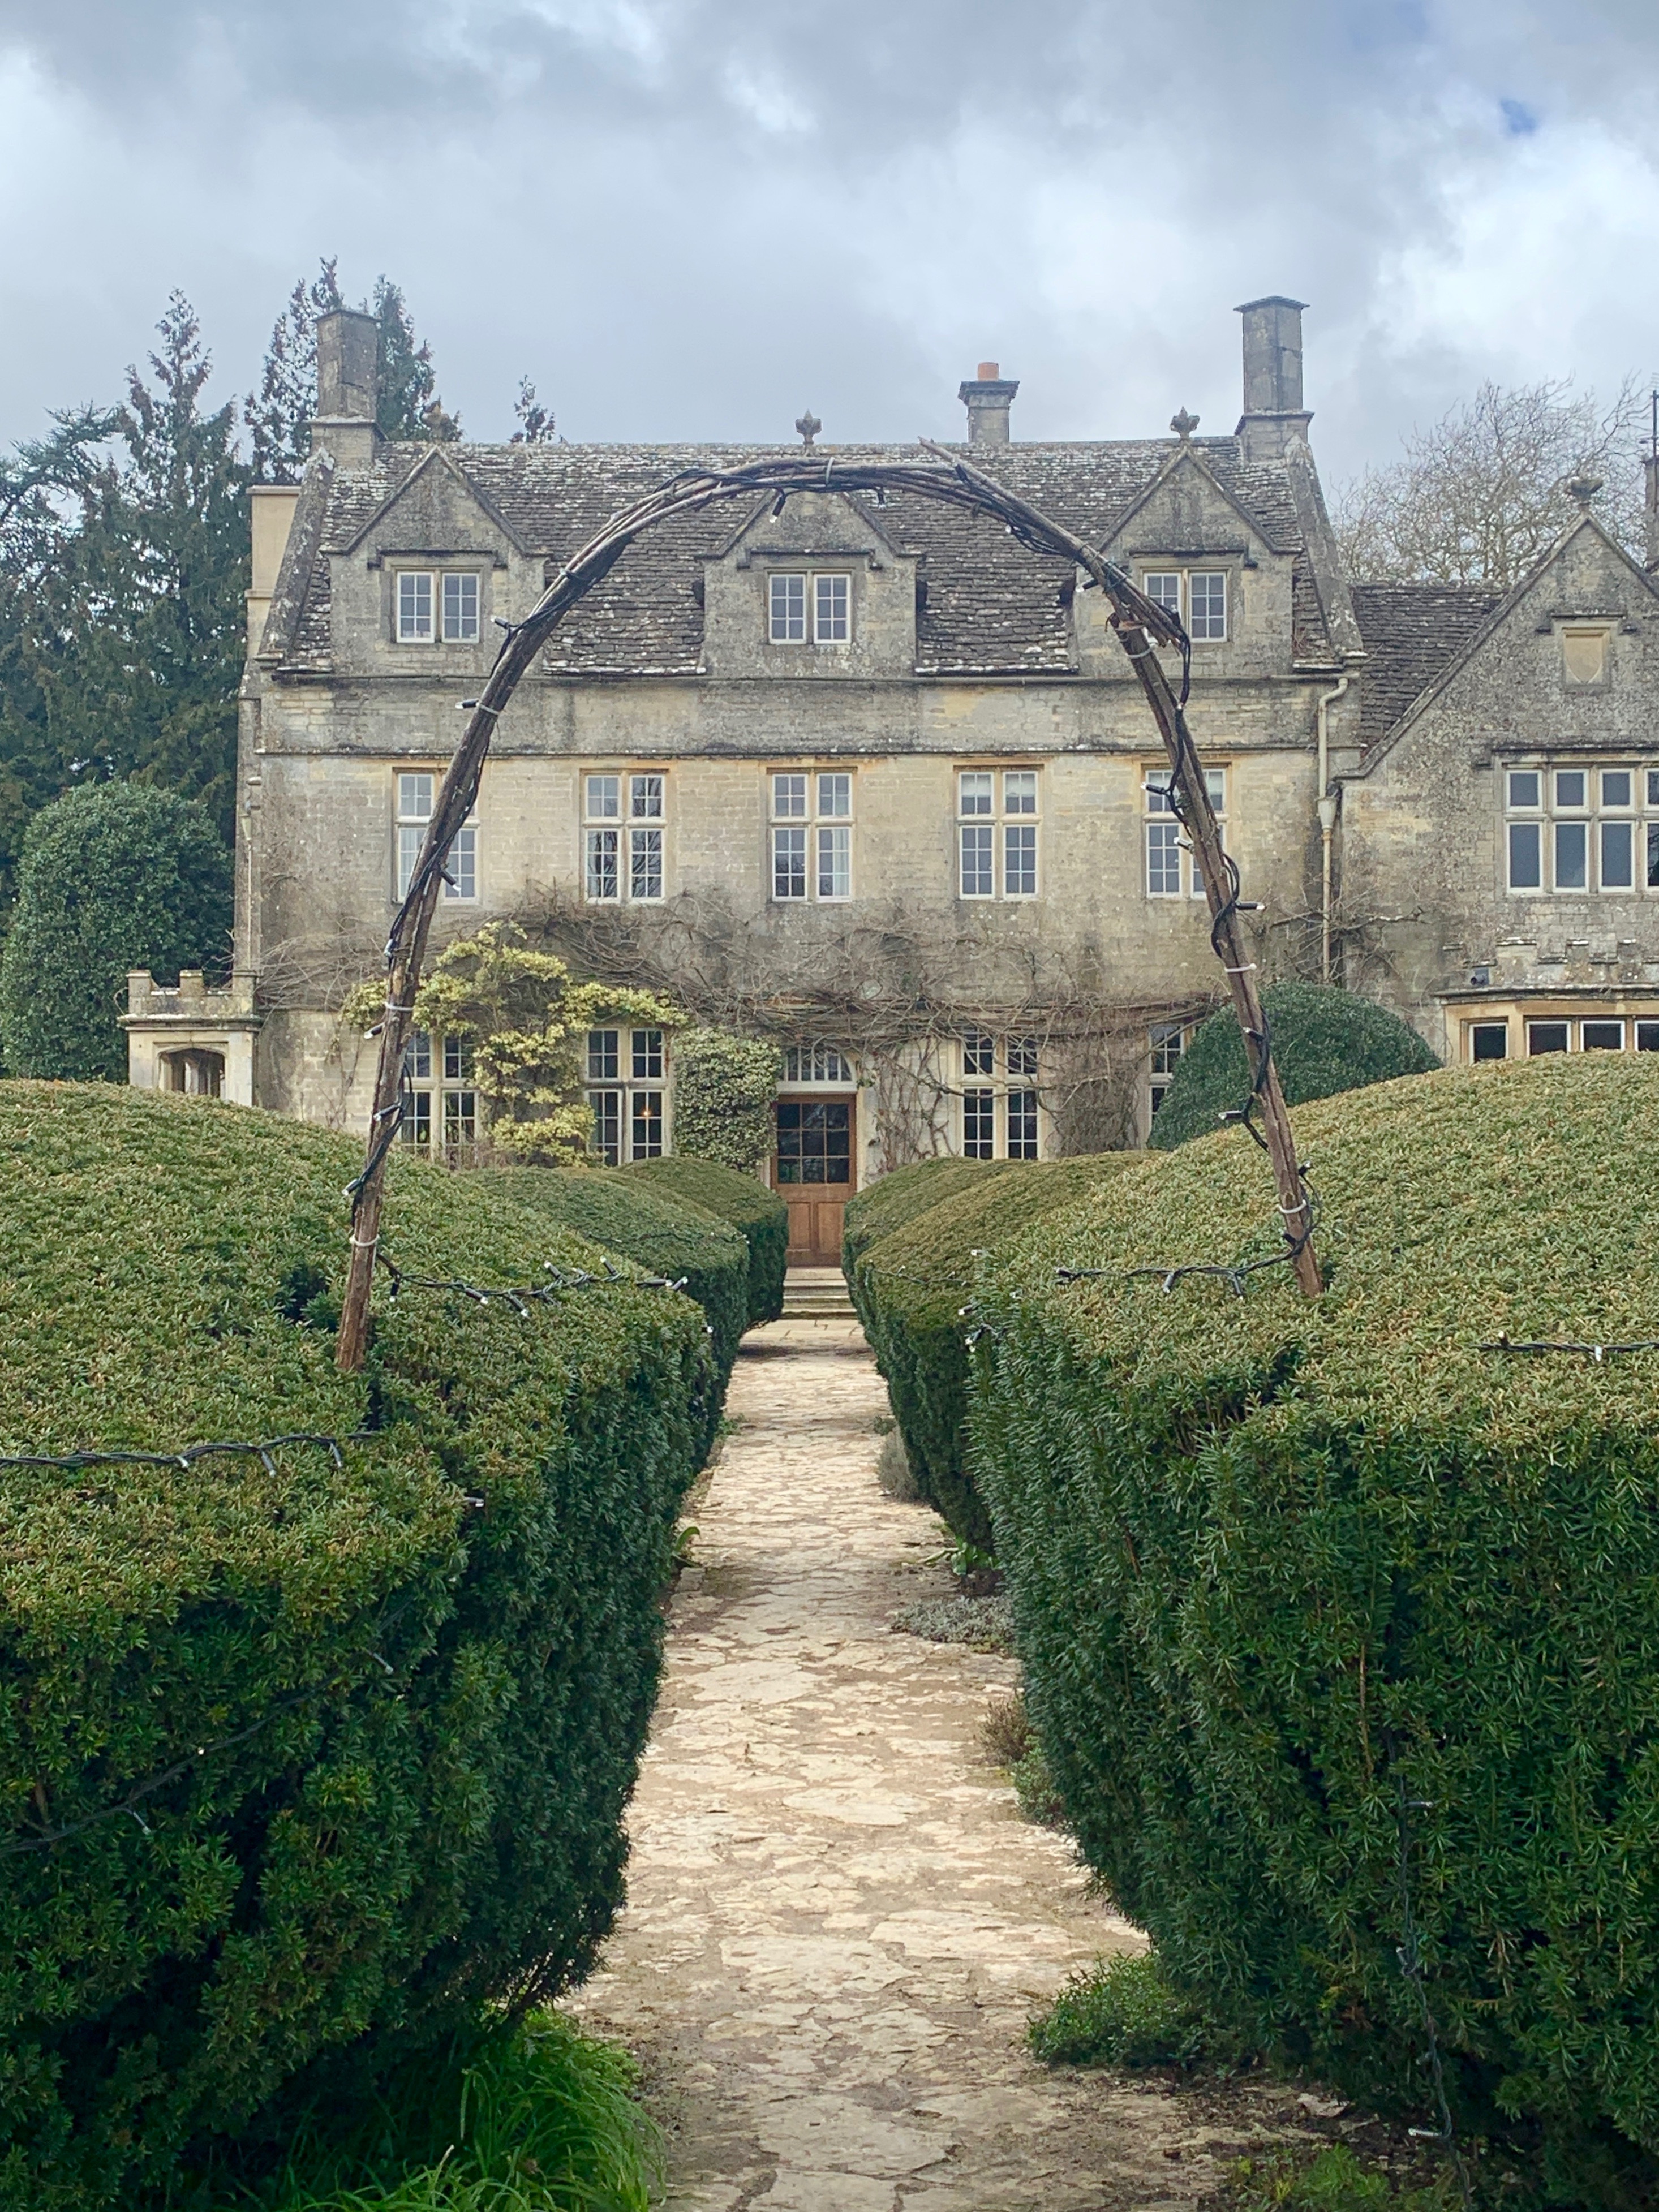 Cotswolds photo by Christina Dandar for The Potted Boxwood. 10